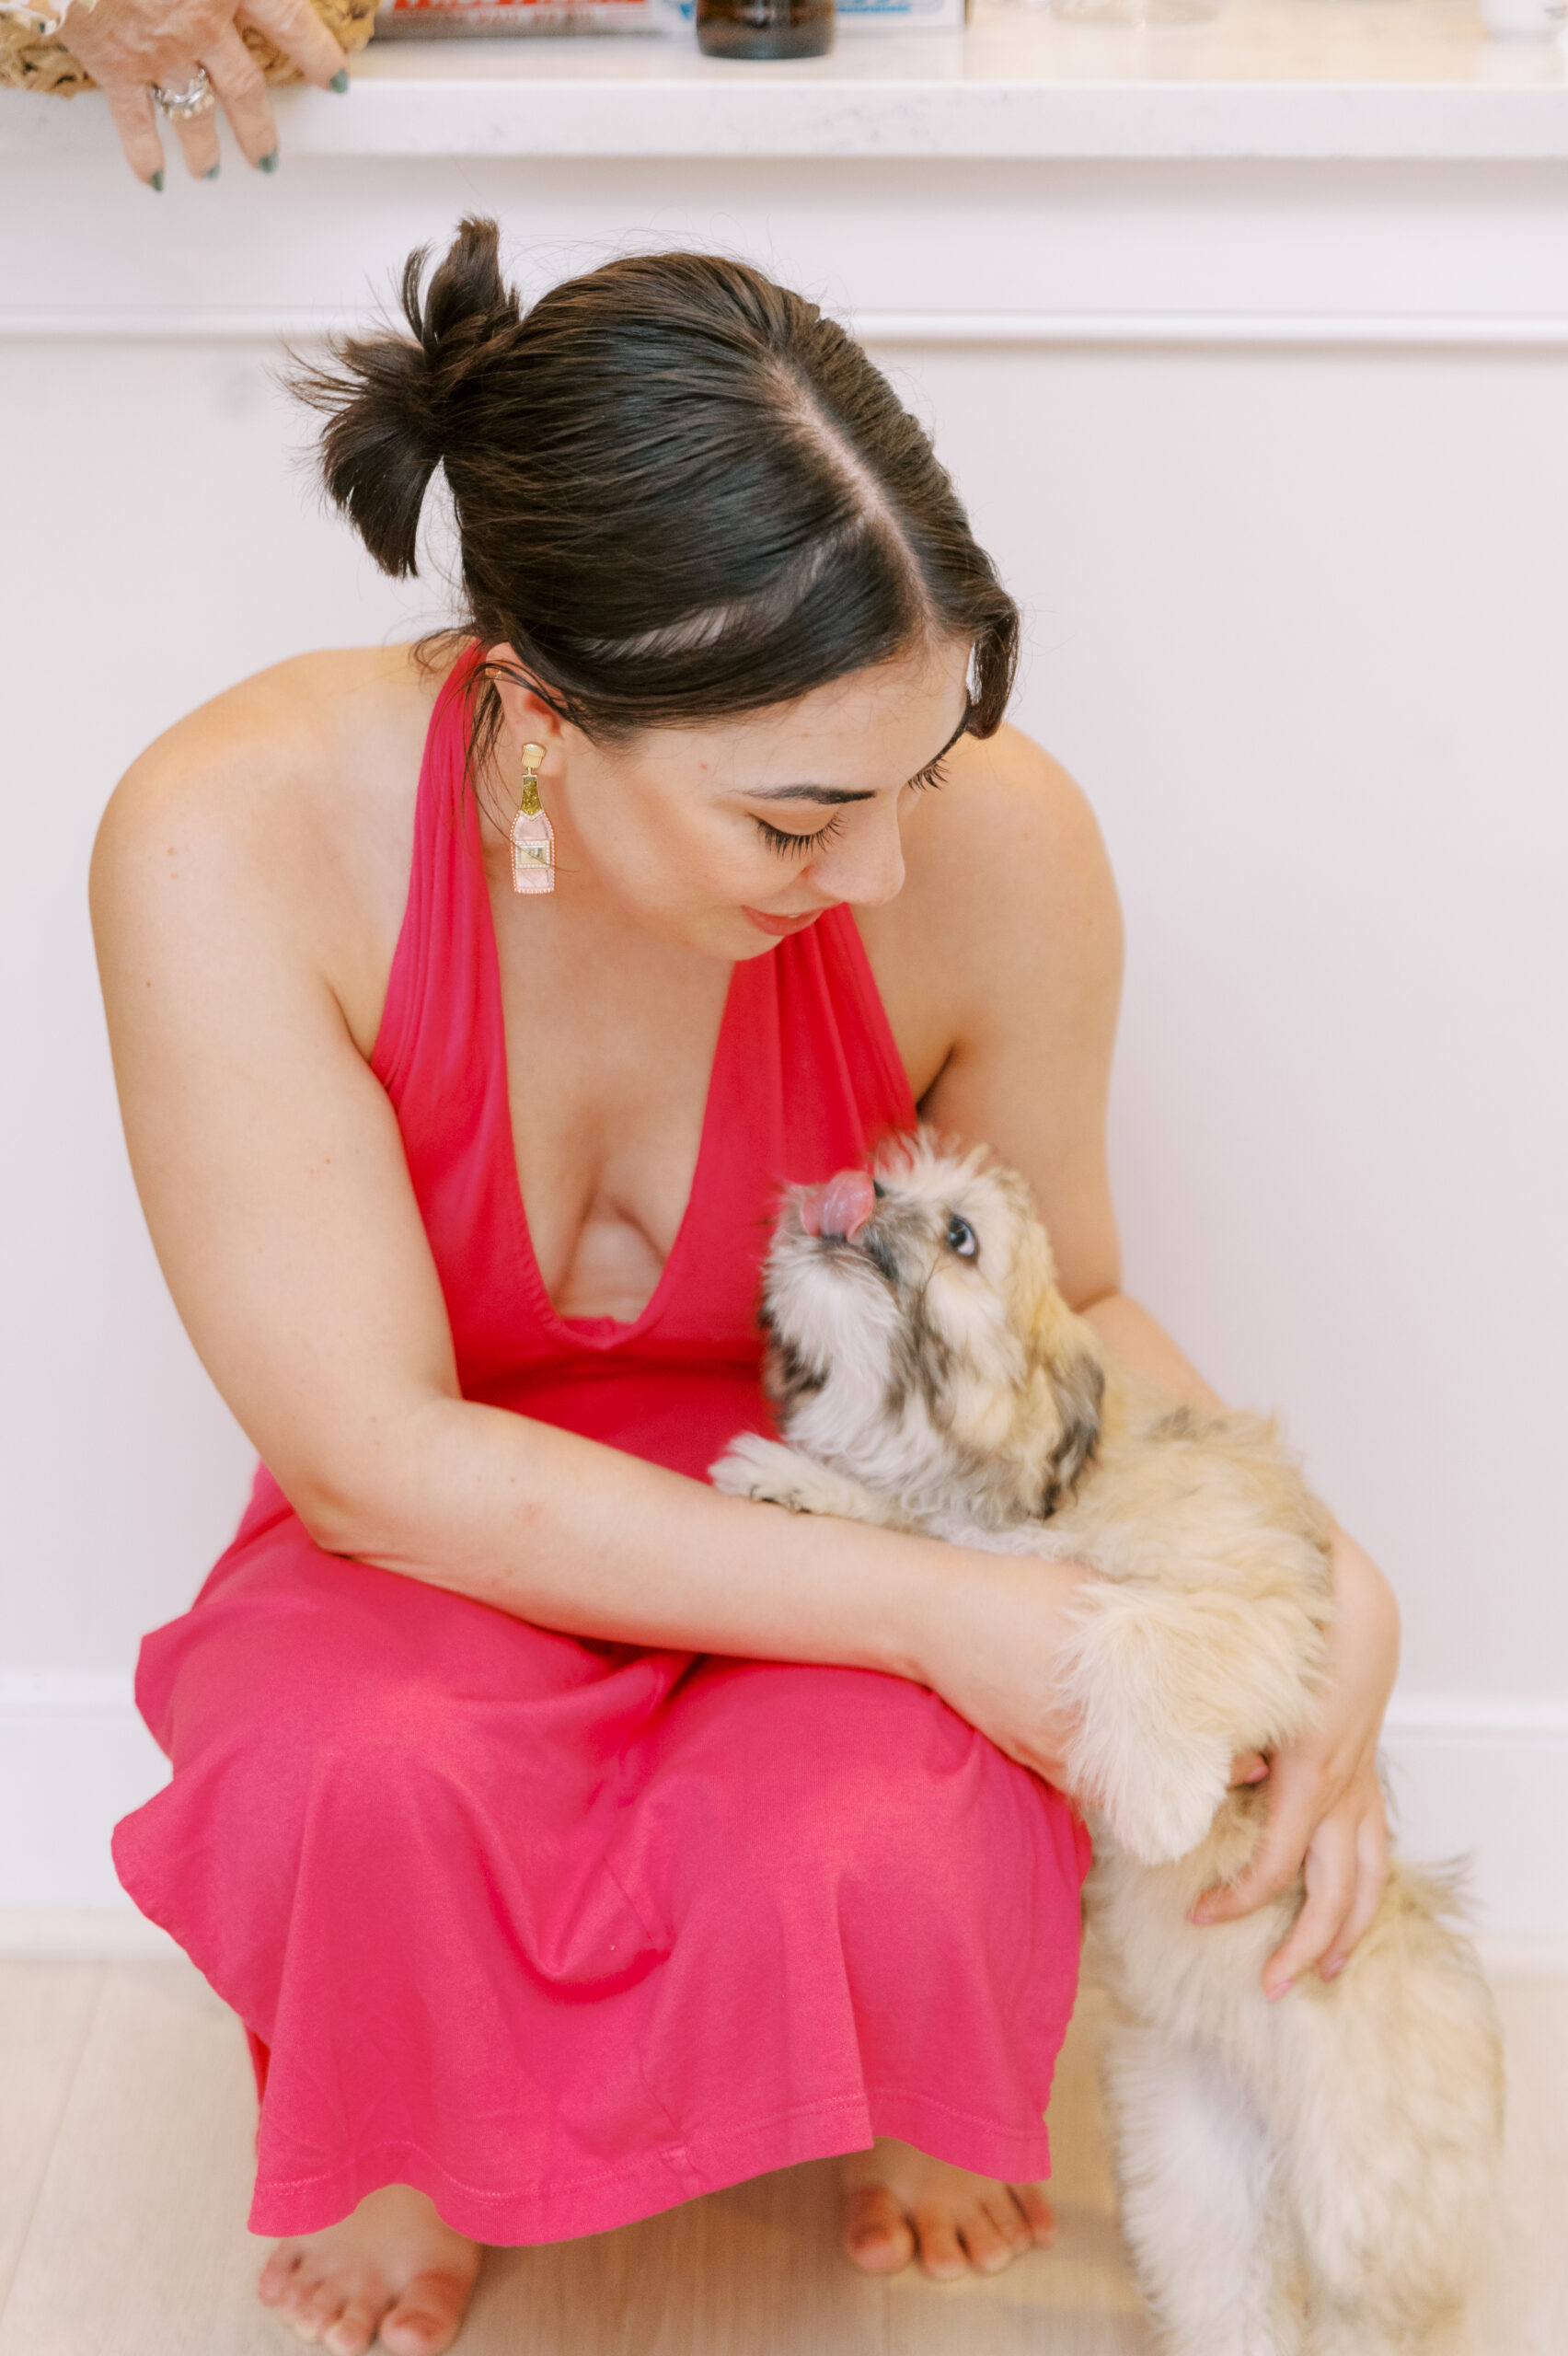 Cherish Your Furry Friends: February Mini Sessions for Pet Parents - February Mini Sessions for Pet Parents in Northern Virginia